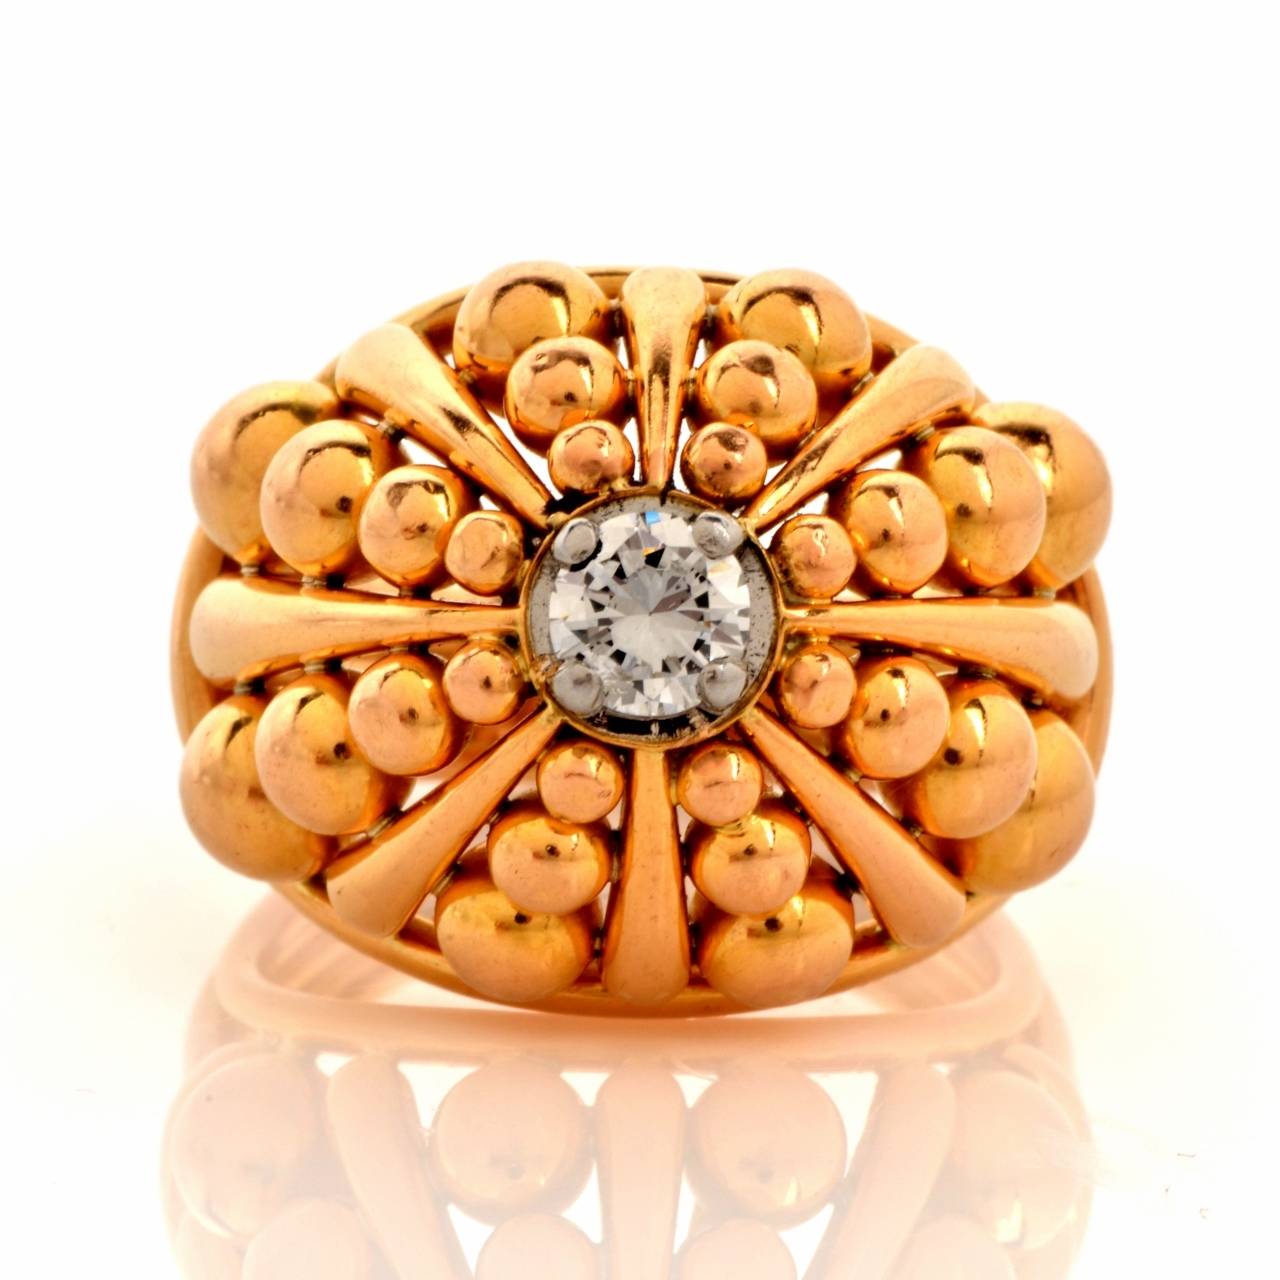 This ring of captivating  dome design and immaculate craftsmanship is handcrafted in solid 18K rose gold, weighing approx. 15.4 grams and 13 mm high. . The artfully designed, pyramidal shape dome plaque exposes at the center a genuine 0.40ct 